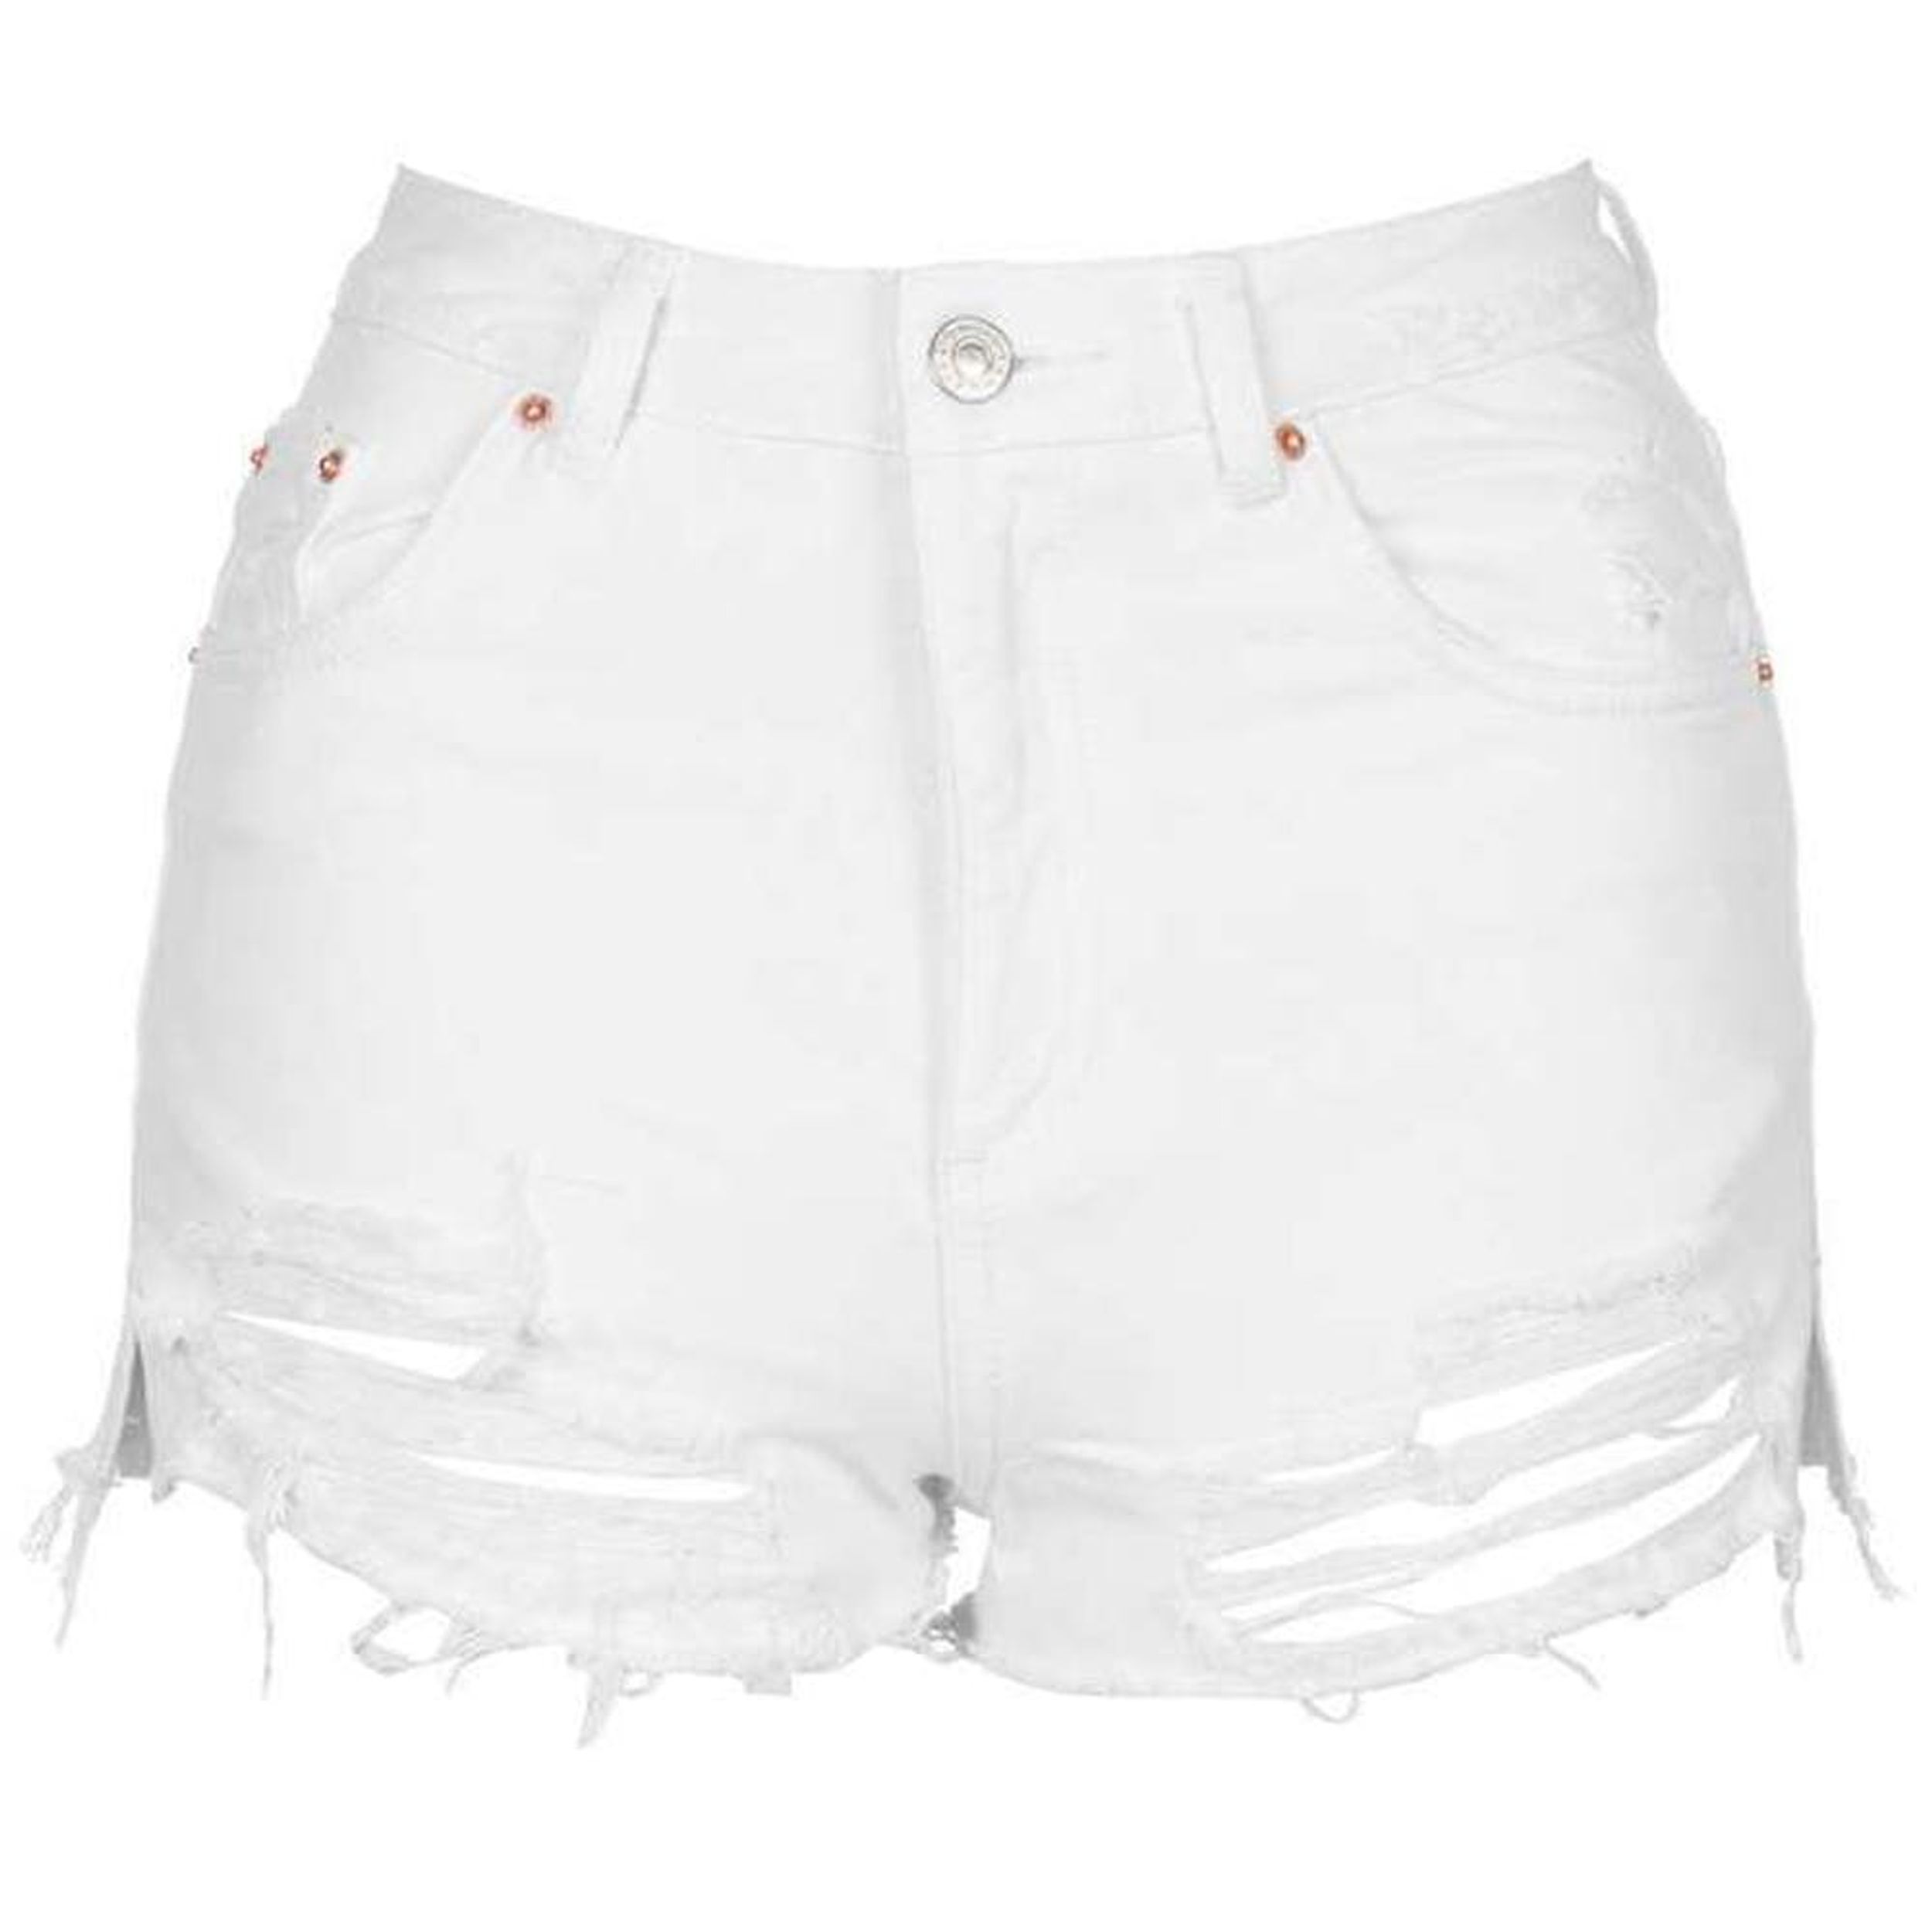 These Topshop Denim Cutoffs Are the Most Pinned Shorts of 2017 So Far